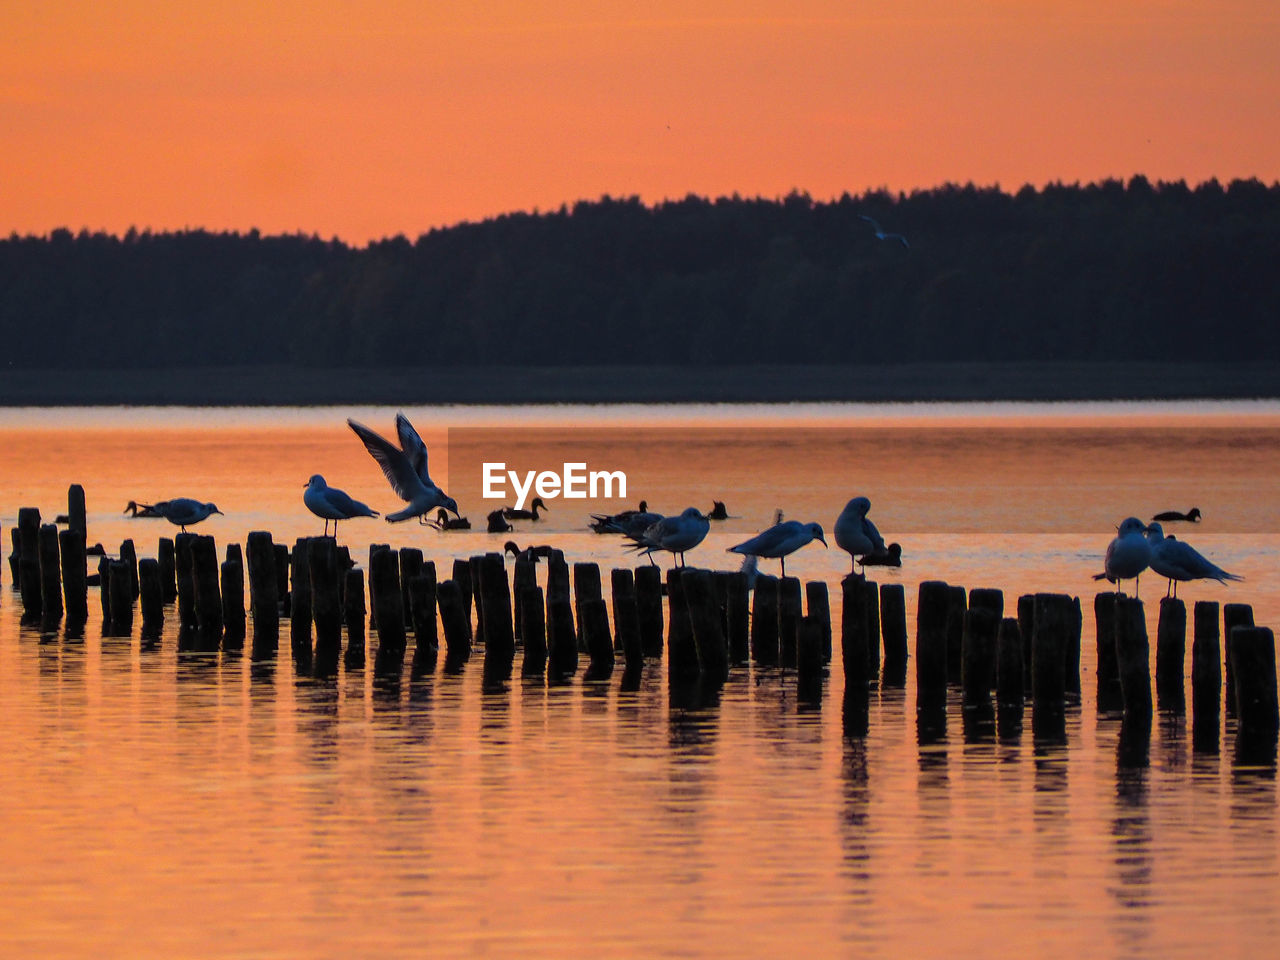 VIEW OF BIRDS IN LAKE DURING SUNSET